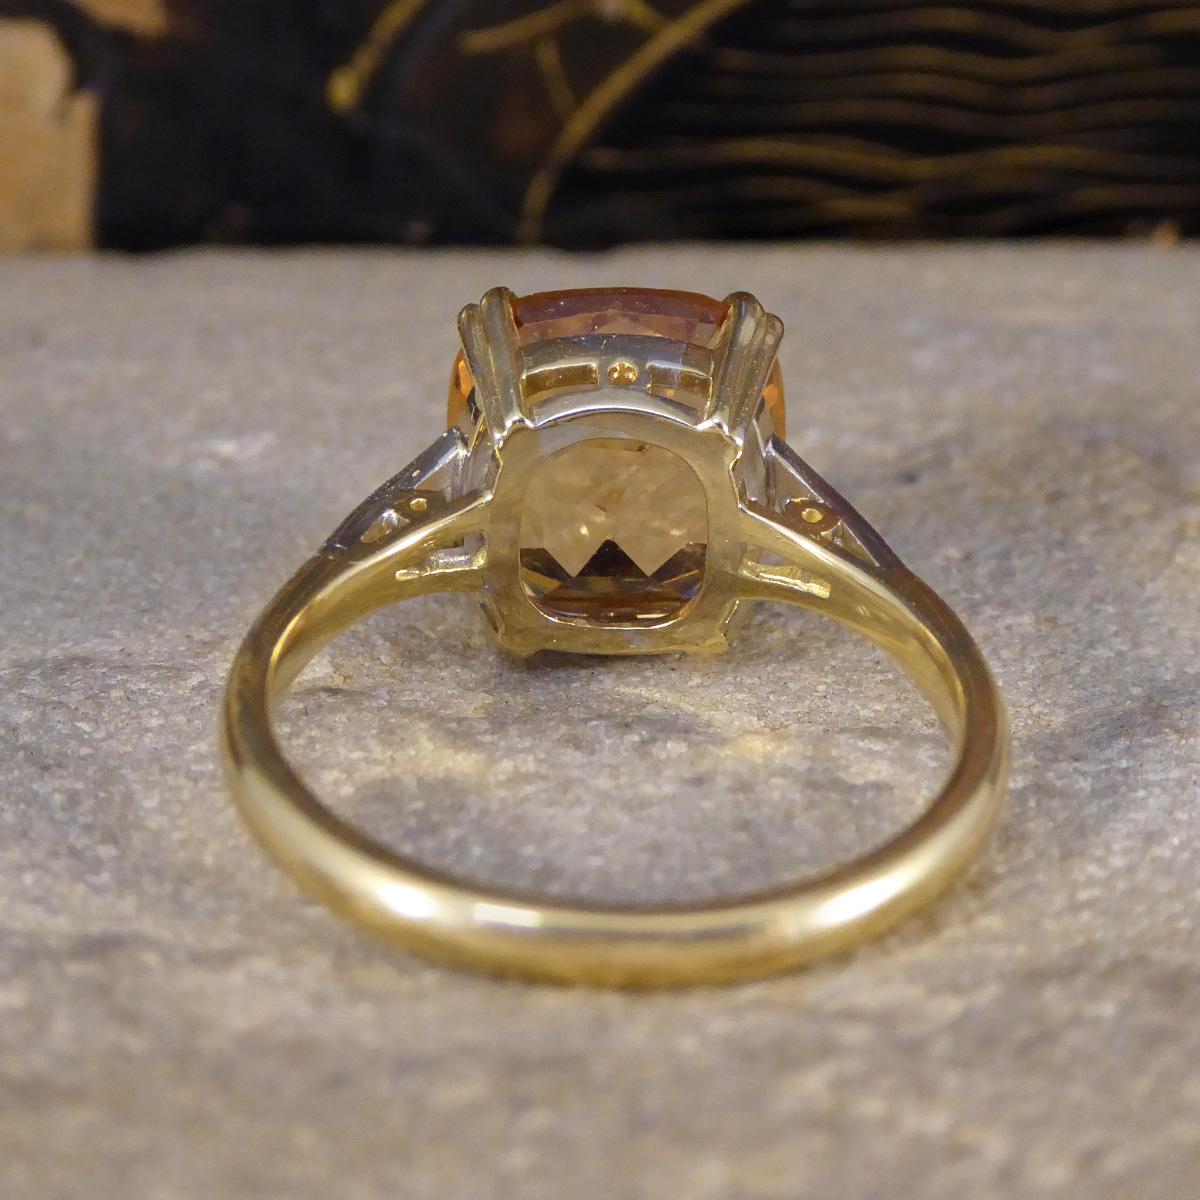 Brilliant Cut 5.12ct Imperial Topaz Ring with Diamond Set Tapered Shoulders in 18ct Gold